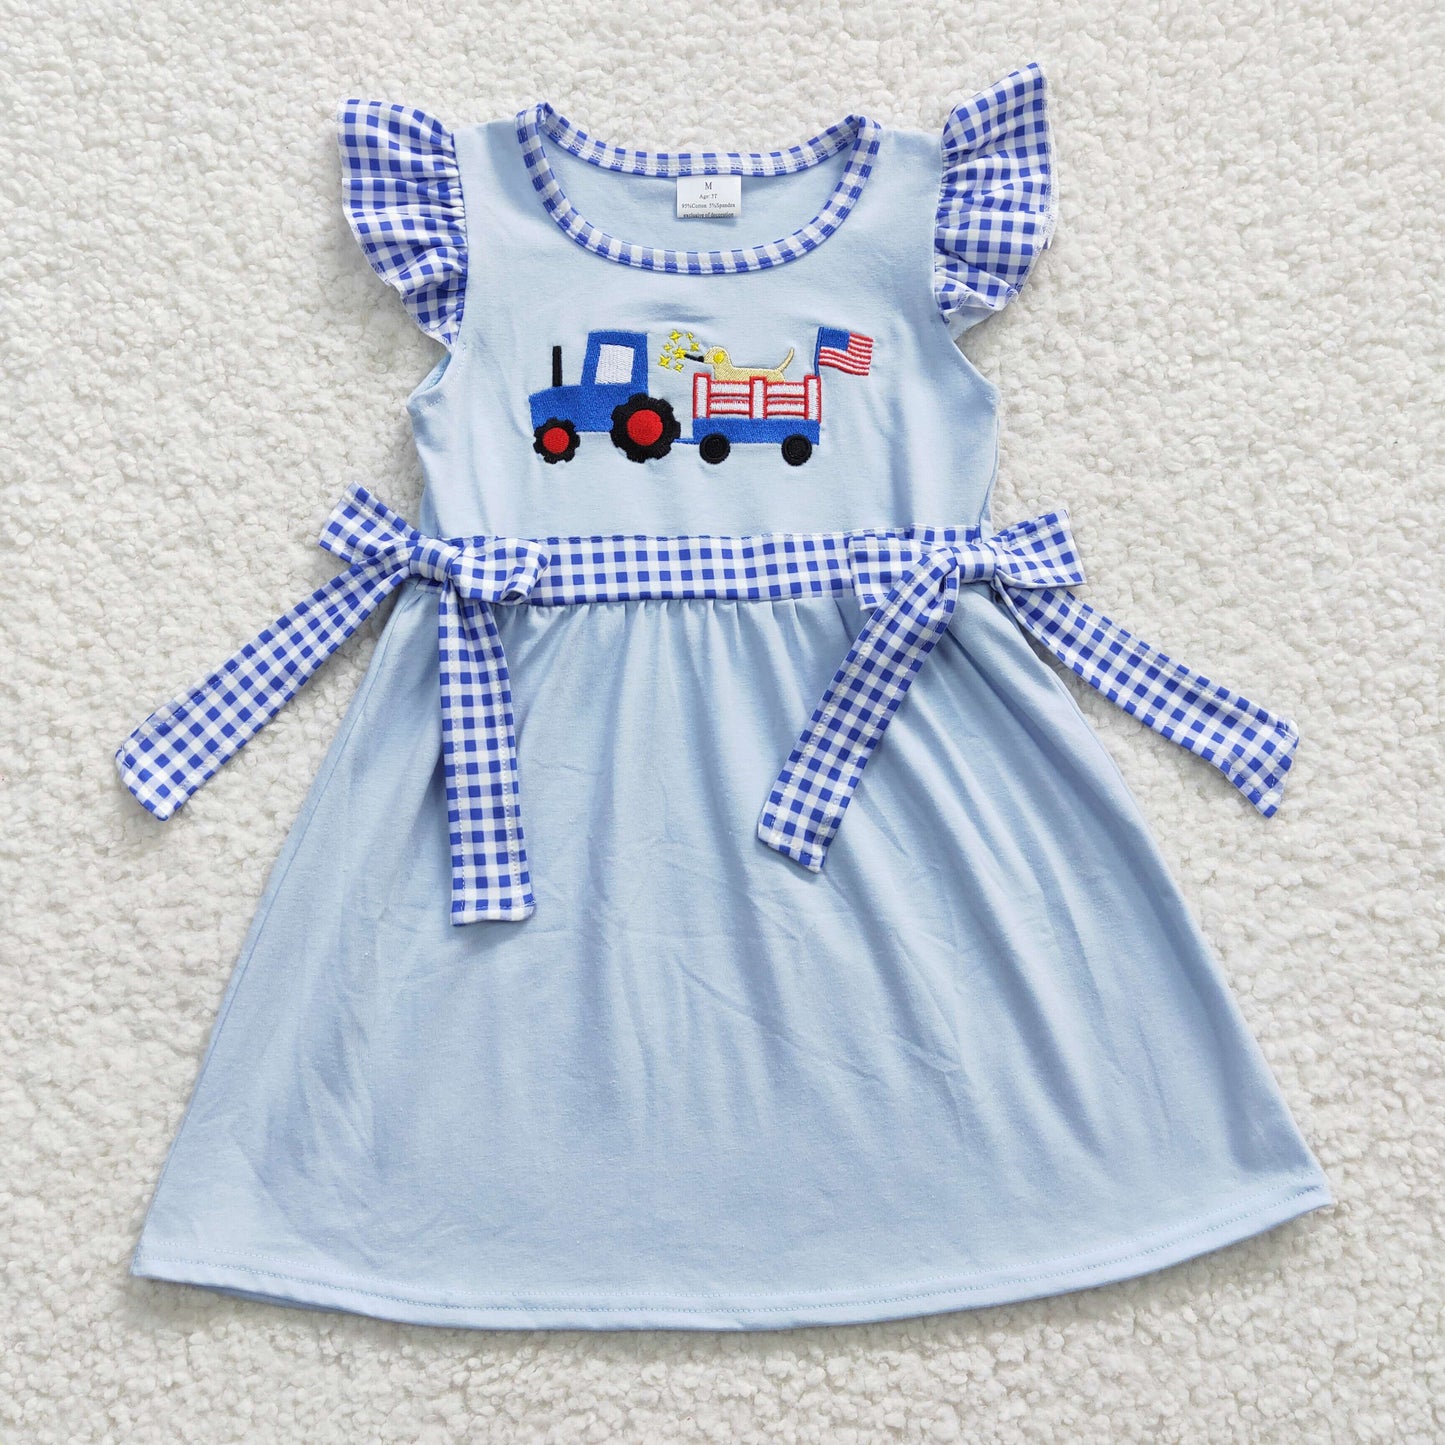 Blue Stripe Embroidery July of 4th Girls Dress